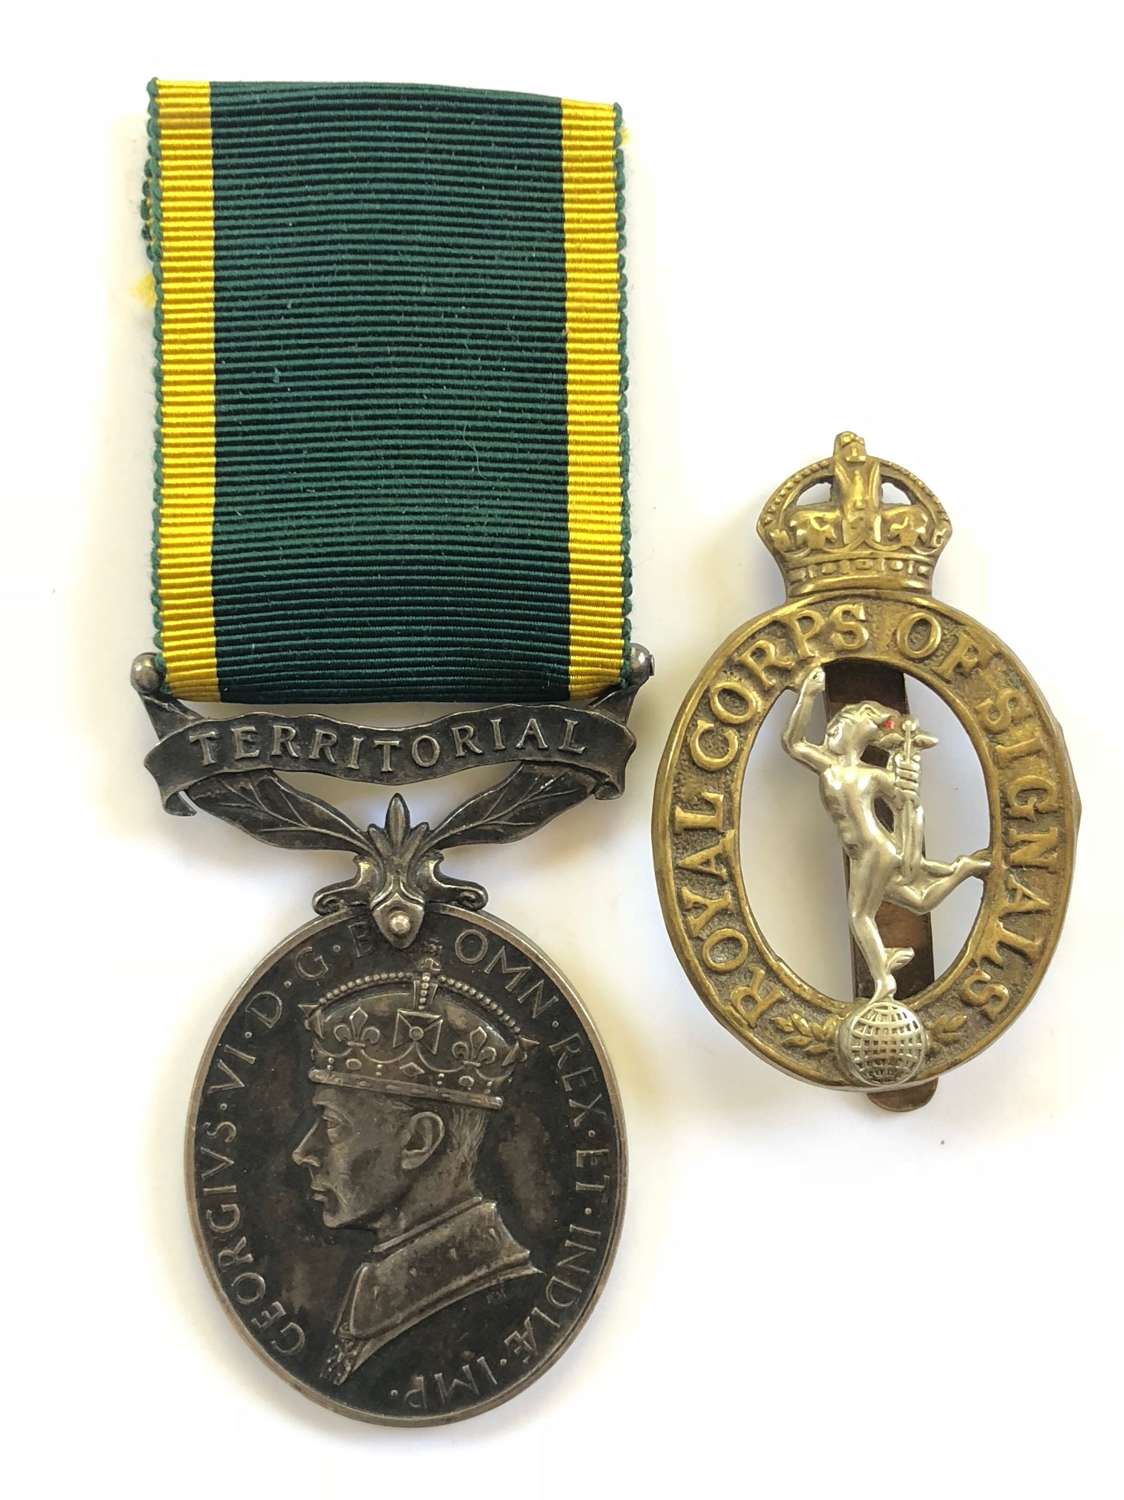 Royal Corps of Signals Territorial Efficiency Medal.